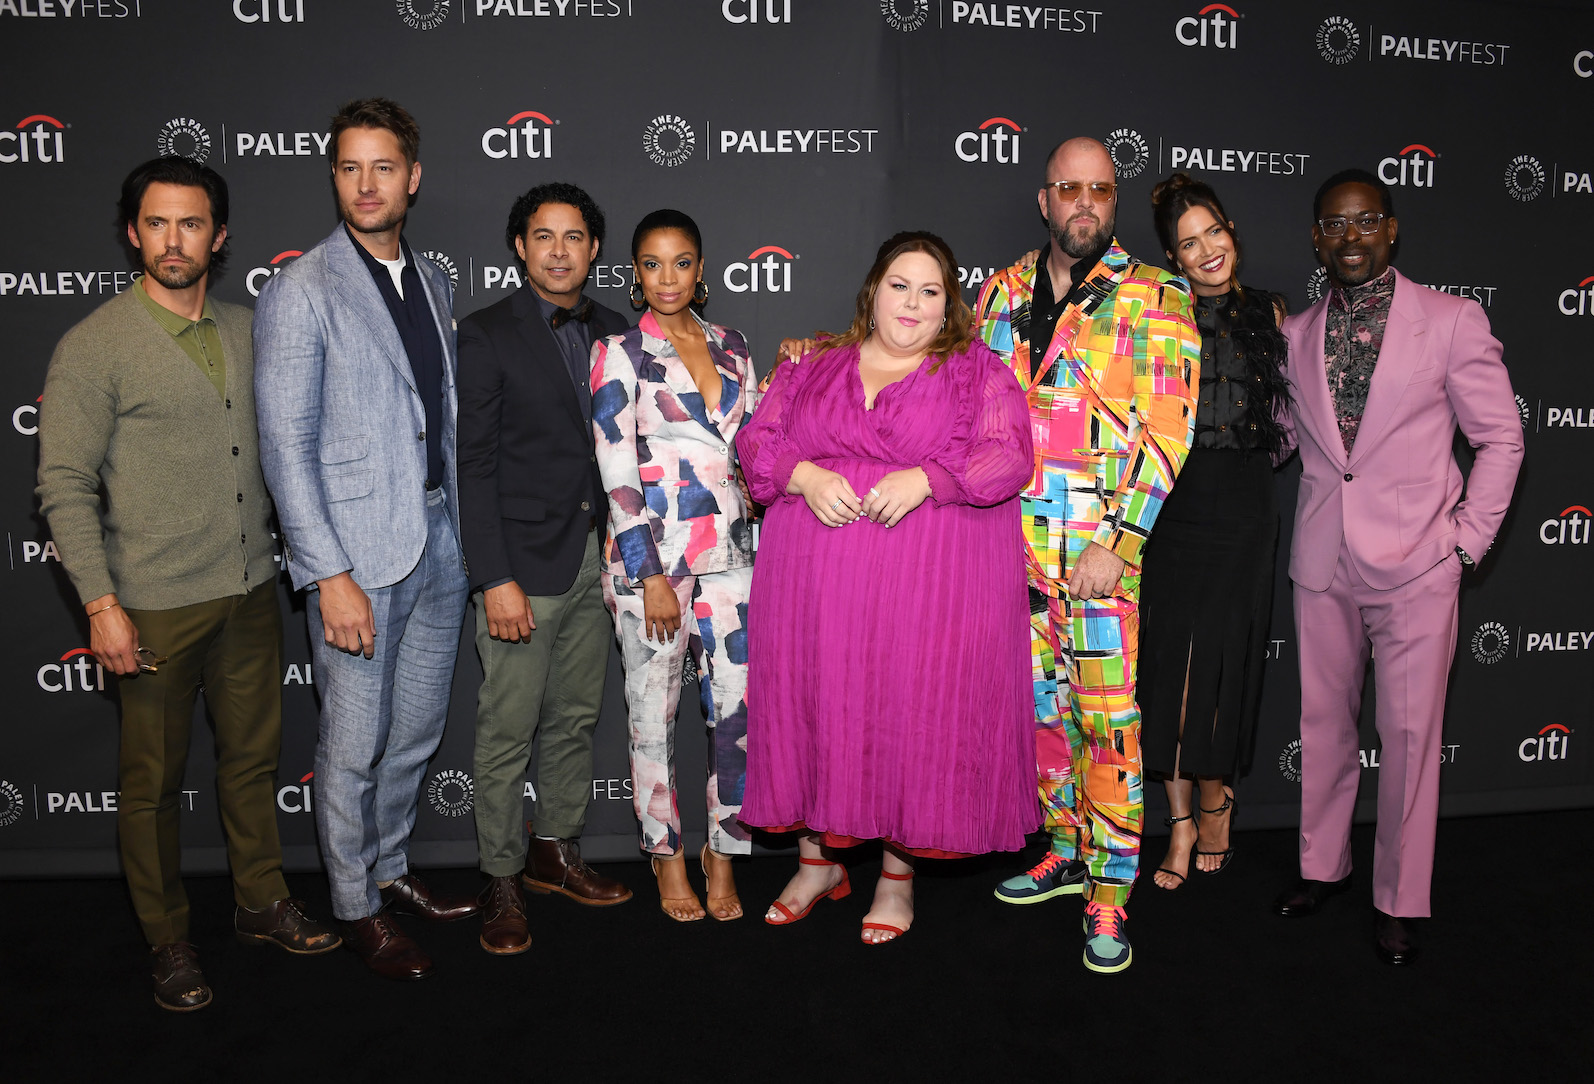 Milo Ventimiglia, Justin Hartley, Jon Huertas, Susan Kelechi Watson, Chrissy Metz, Chris Sullivan, Mandy Moore, and Sterling K. Brown from the 'This Is Us' Season 6 finale standing together at an event